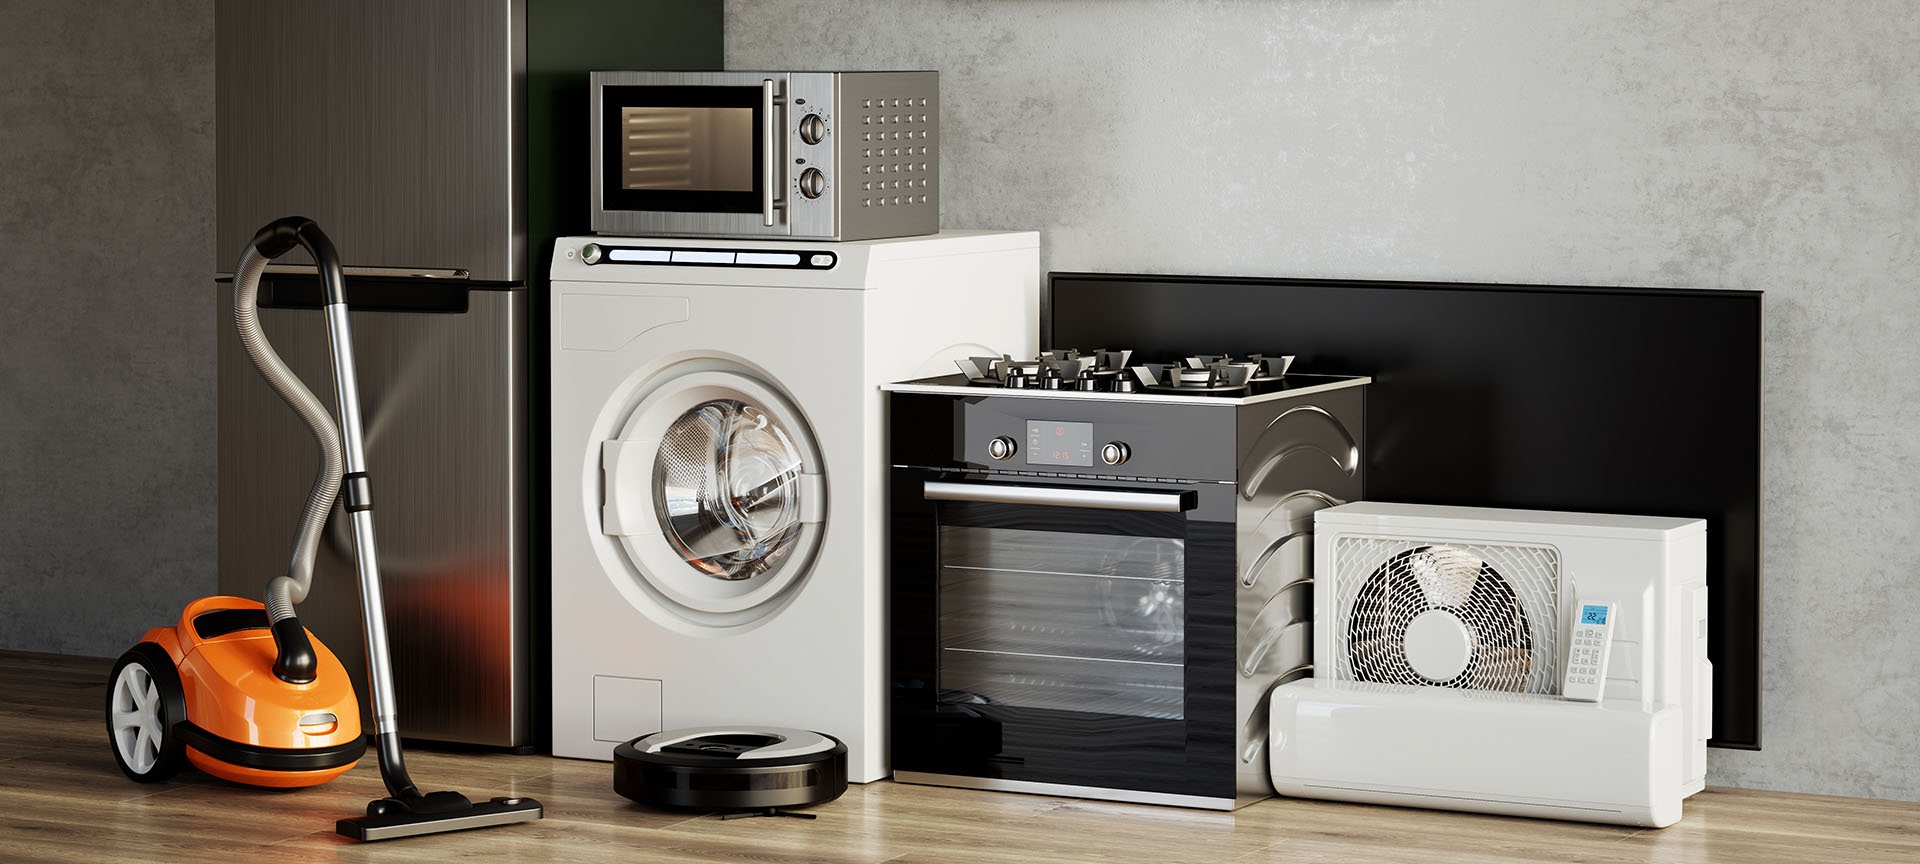 Understanding The Major Types of Home Appliances - Appliance